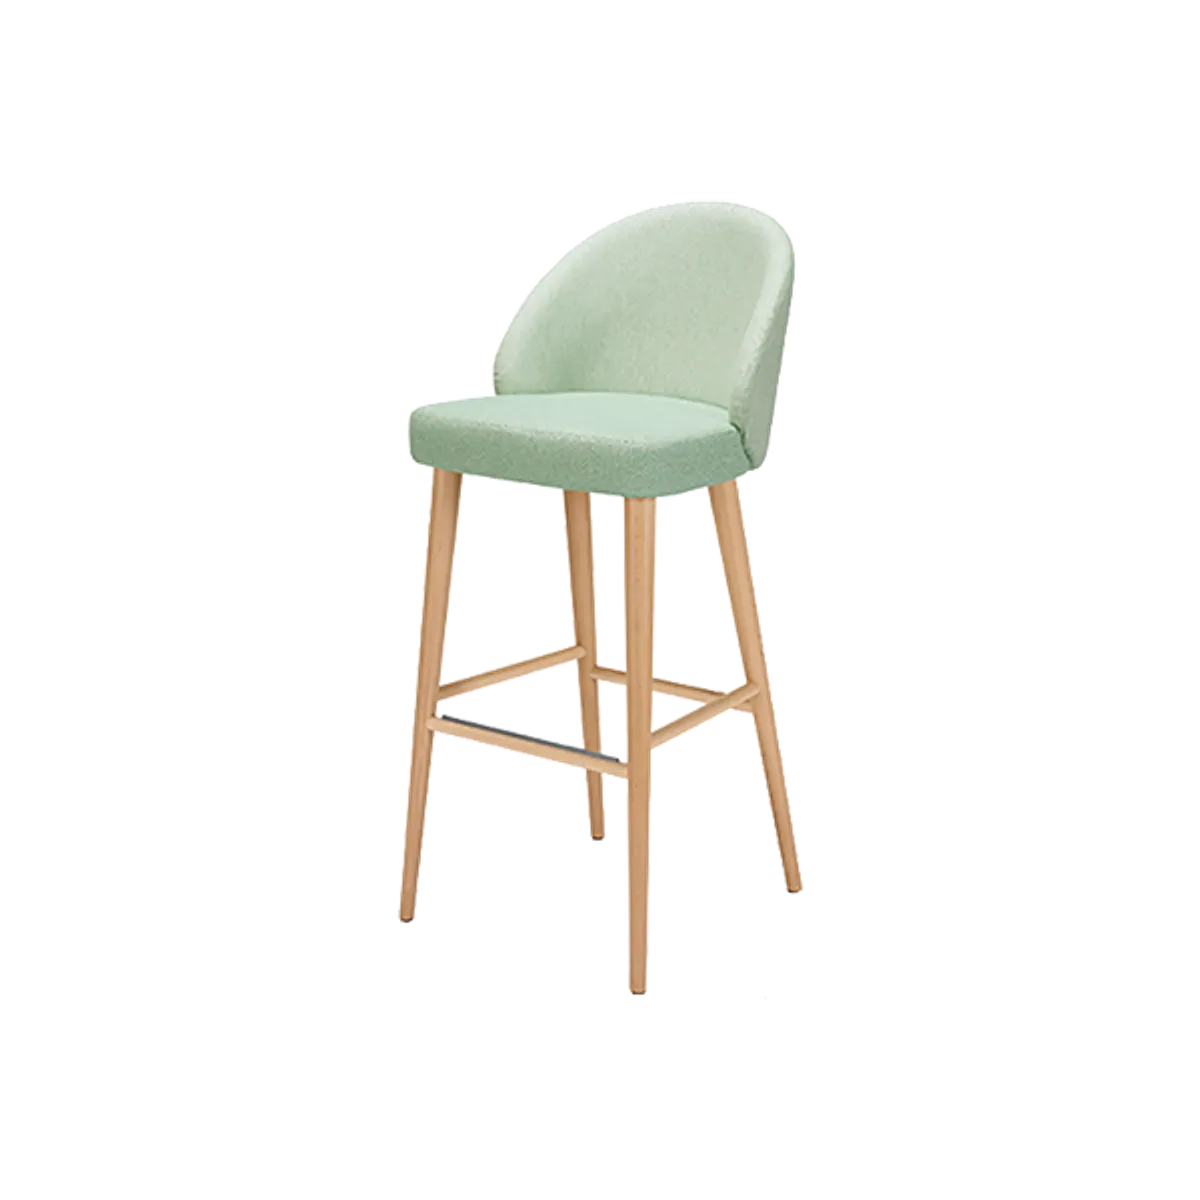 Web Del Rey Bar Stool Contract Furniture Suppliers Inside Out Contracts